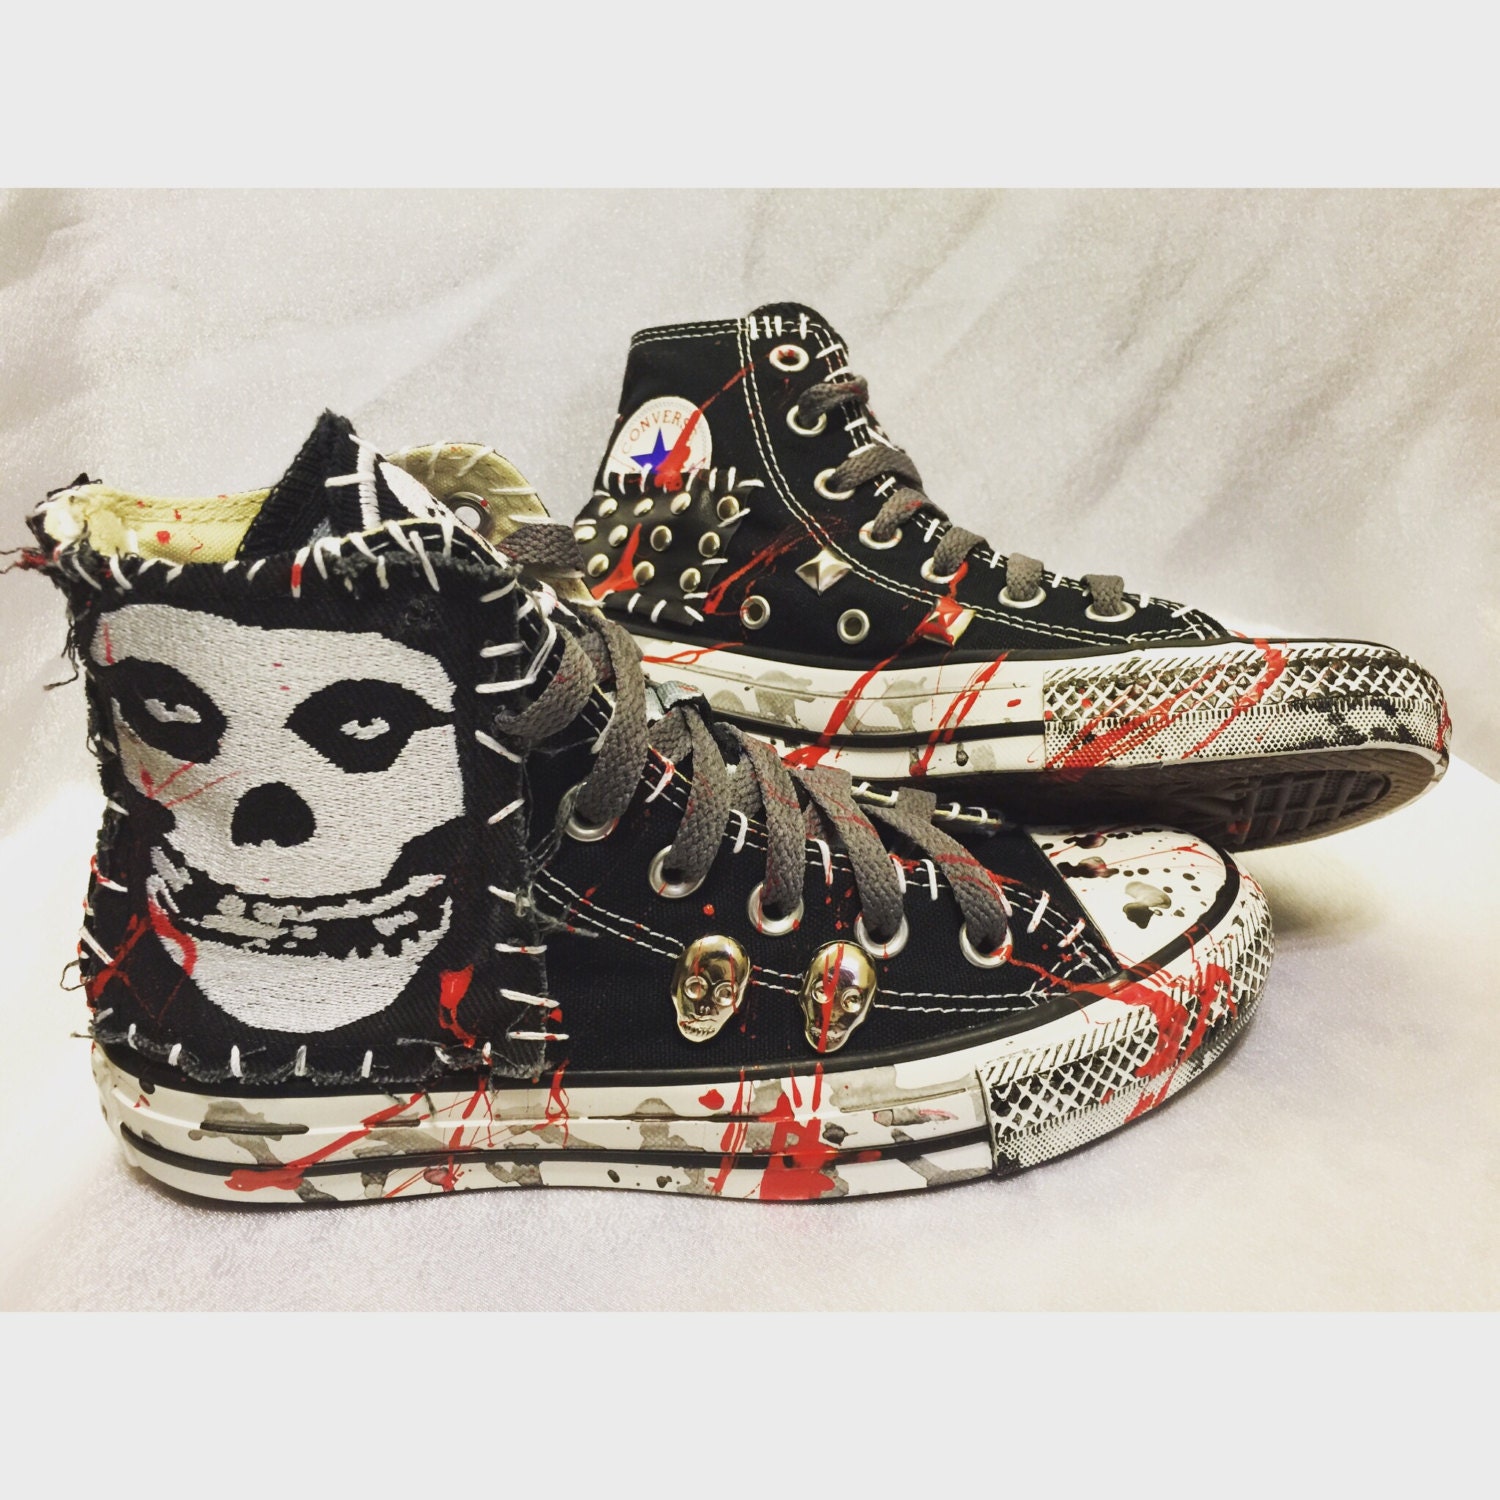 Misfits All Star Converse shoes by Chad Cherry